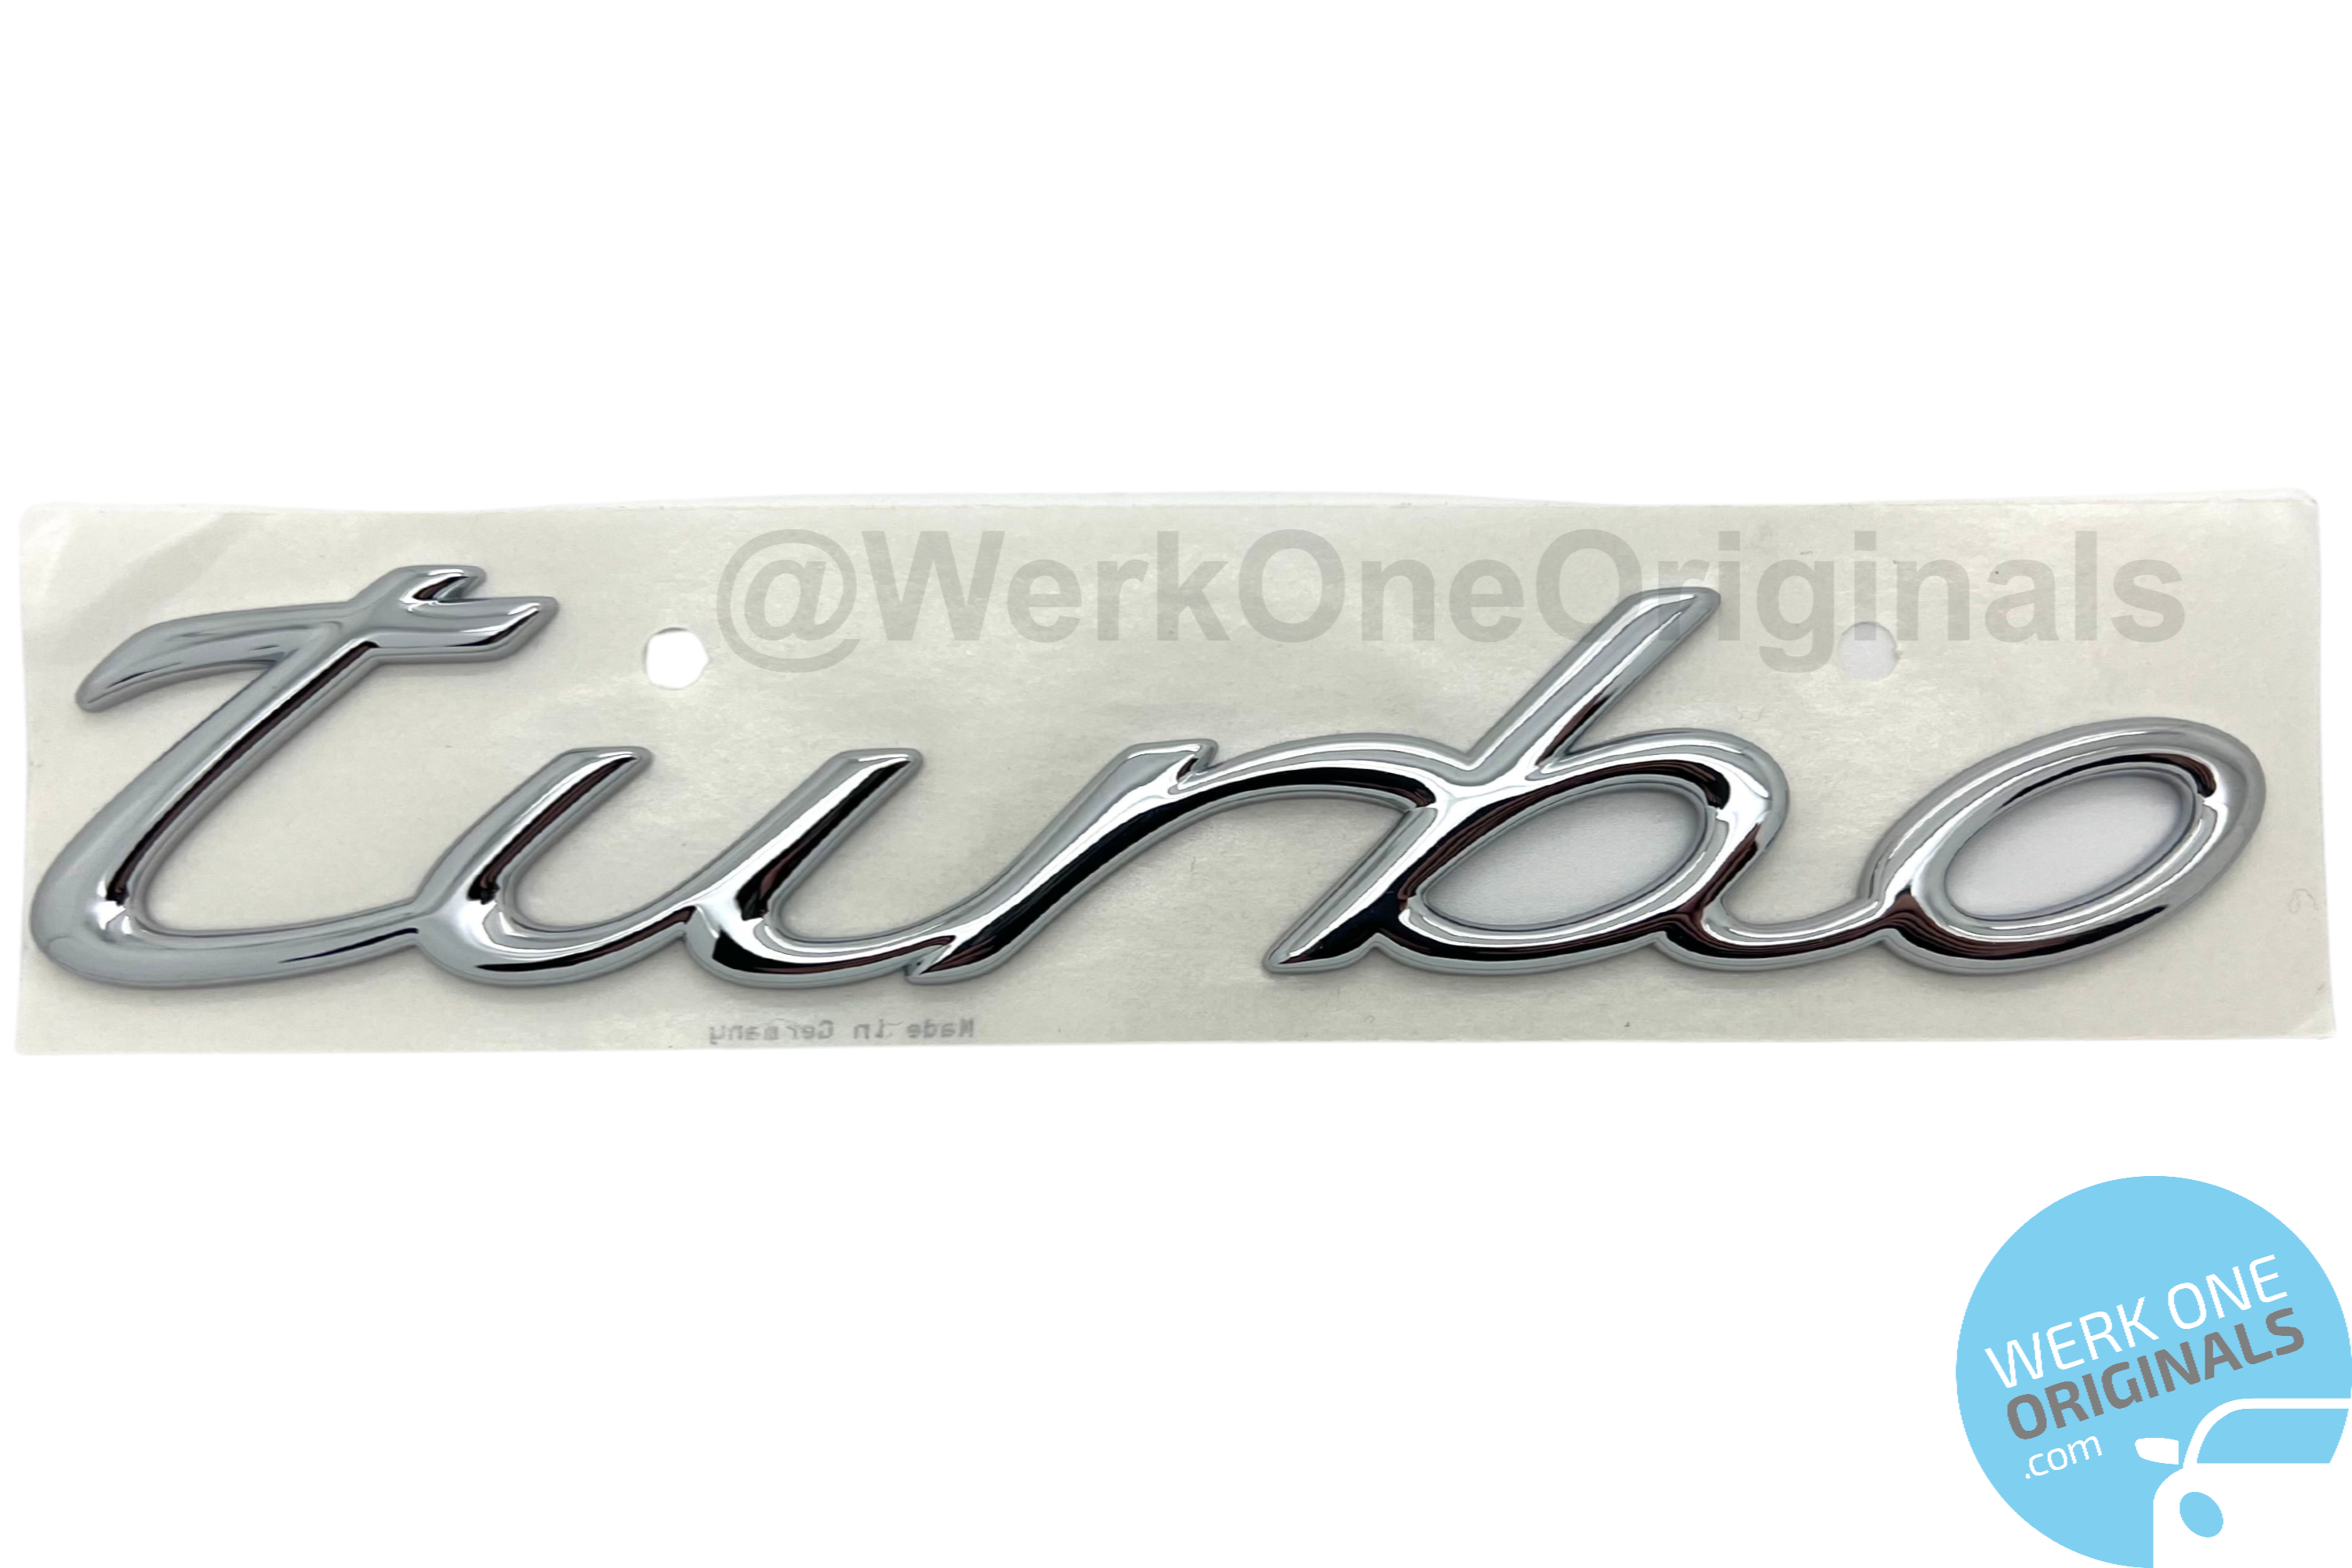 Porsche Official 'Turbo' Rear Badge Decal in Chrome Silver for 996 Turbo Models